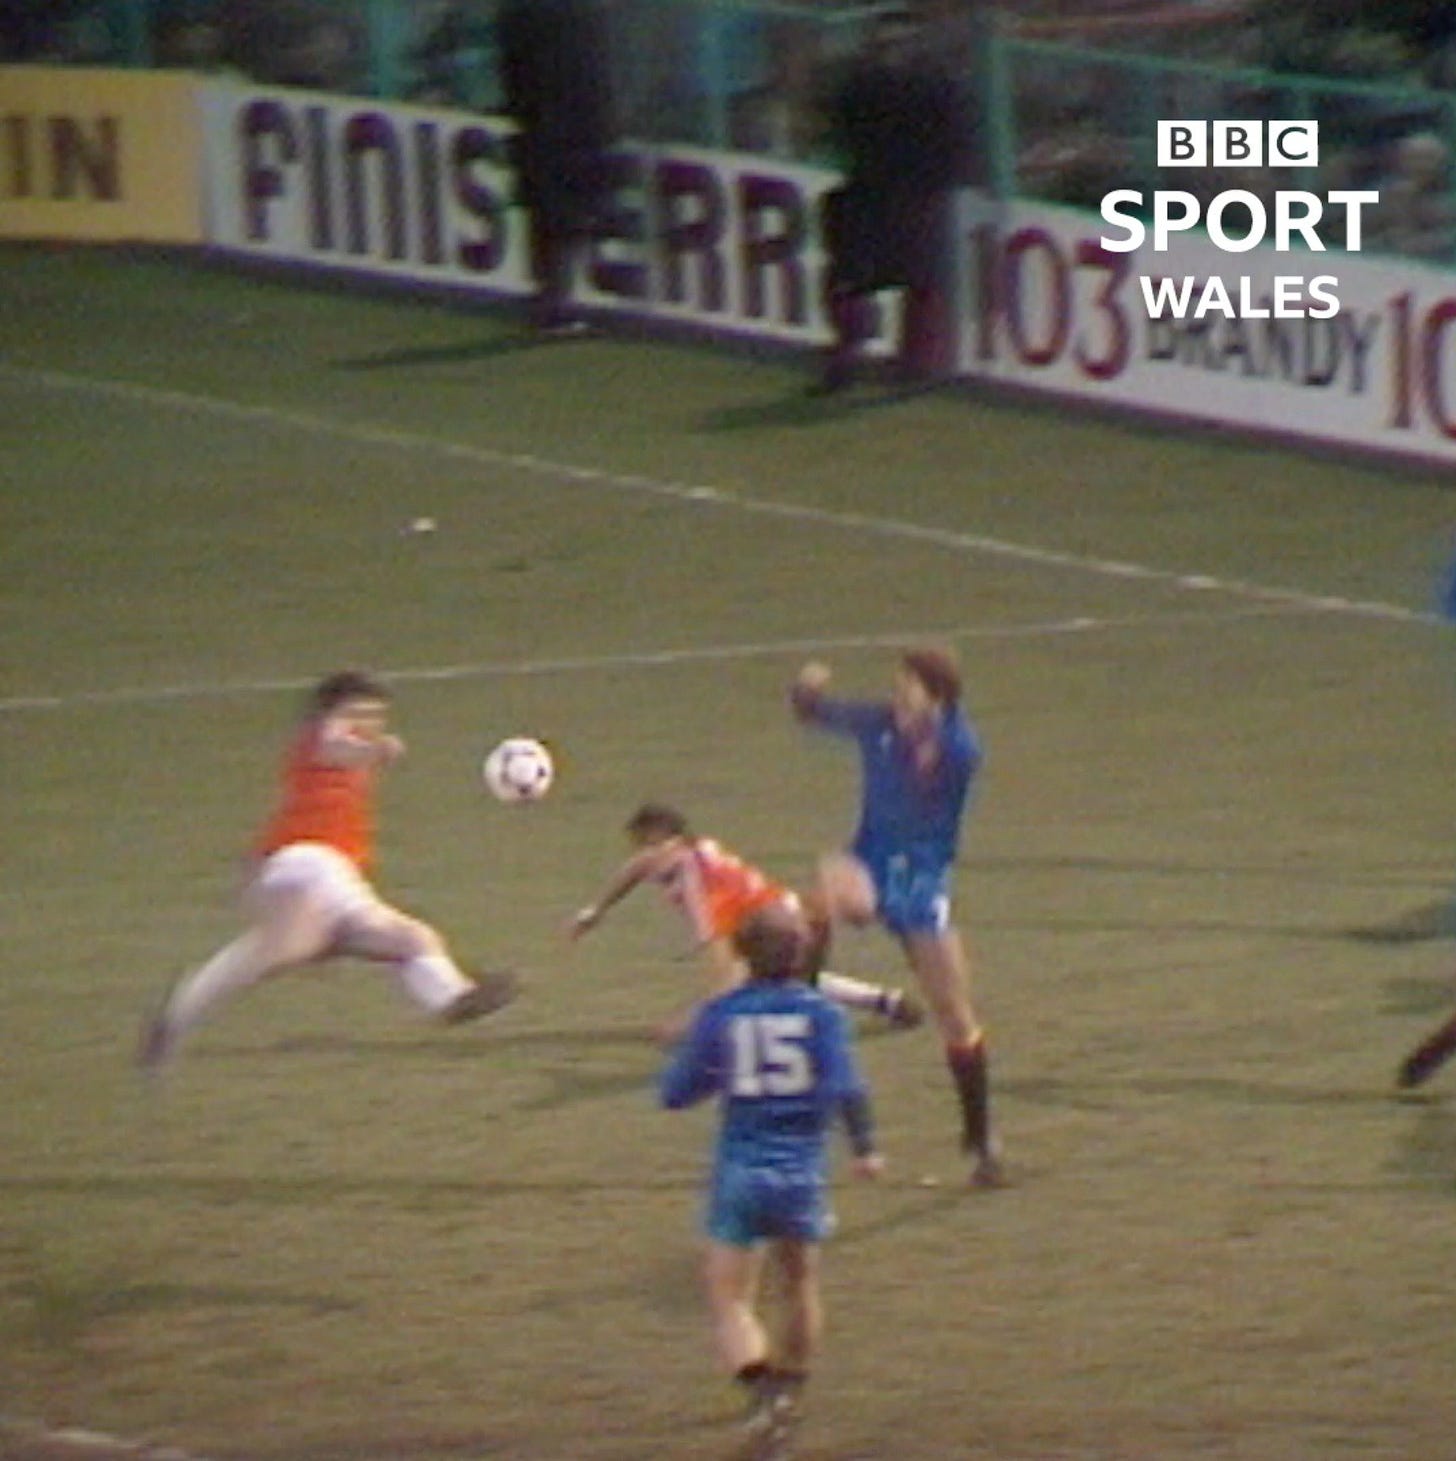 BBC Sport Wales on Twitter: "Mark Hughes' stunning goal for Wales against  Spain in 1985 is still astonishing to watch! 😲 Enjoy.  https://t.co/vbj46OfCIm" / Twitter